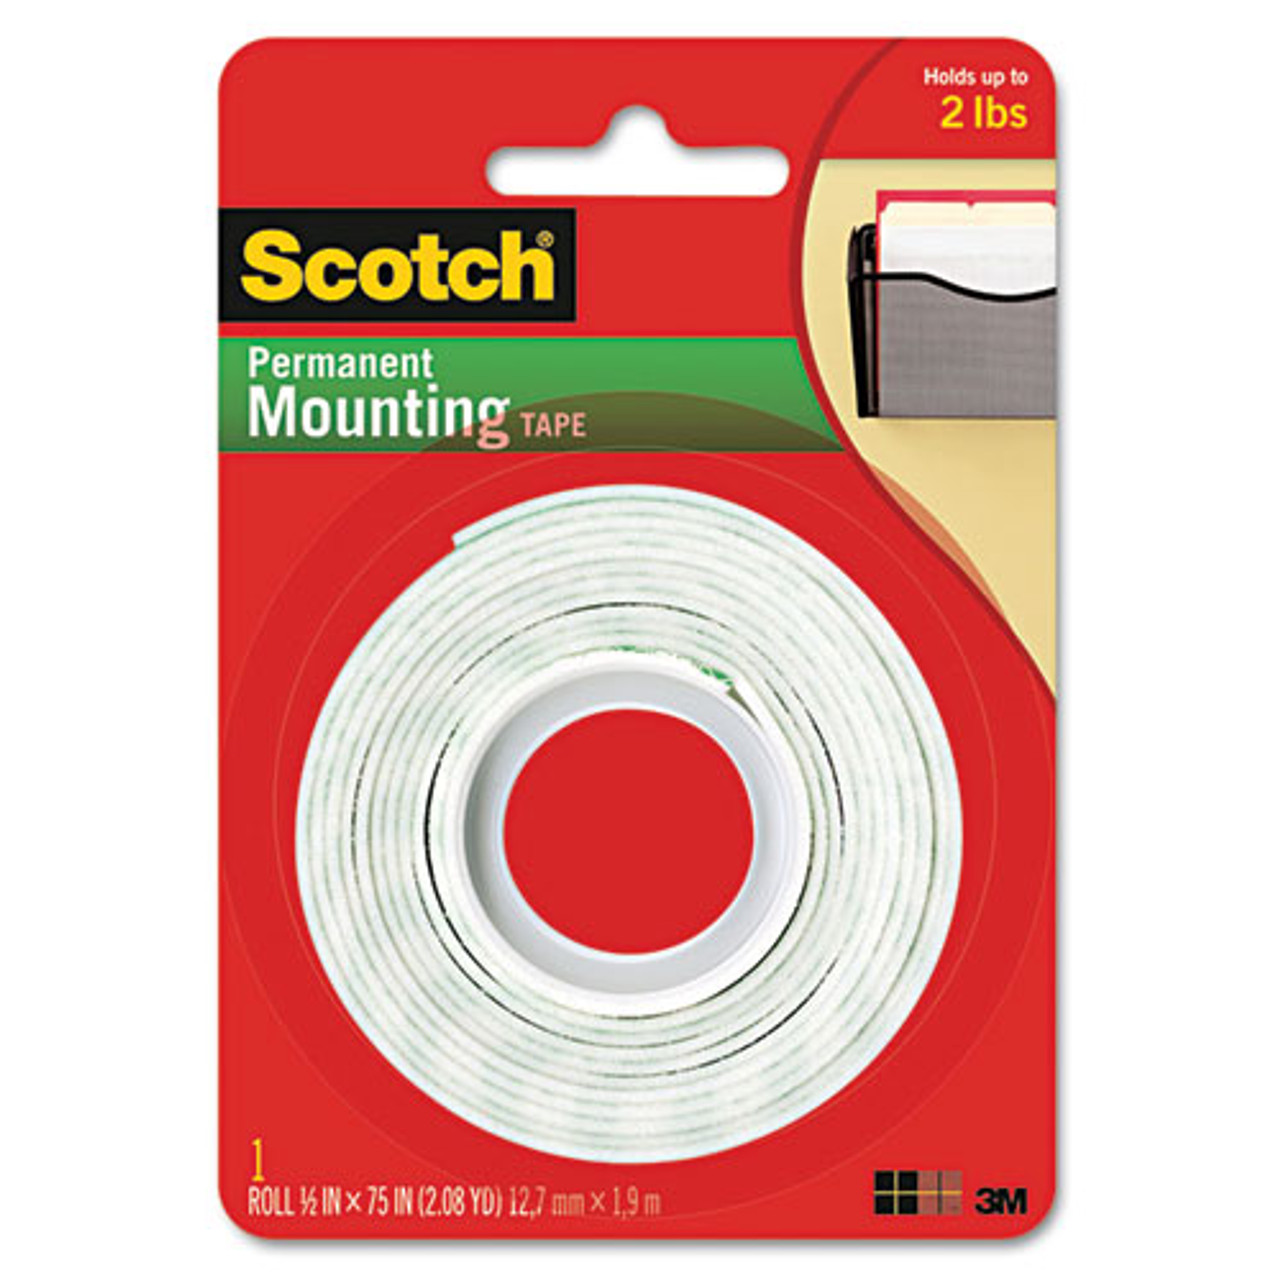 Scotch Double-Coated Foam Mounting Tape - 38 yd Length x 0.75